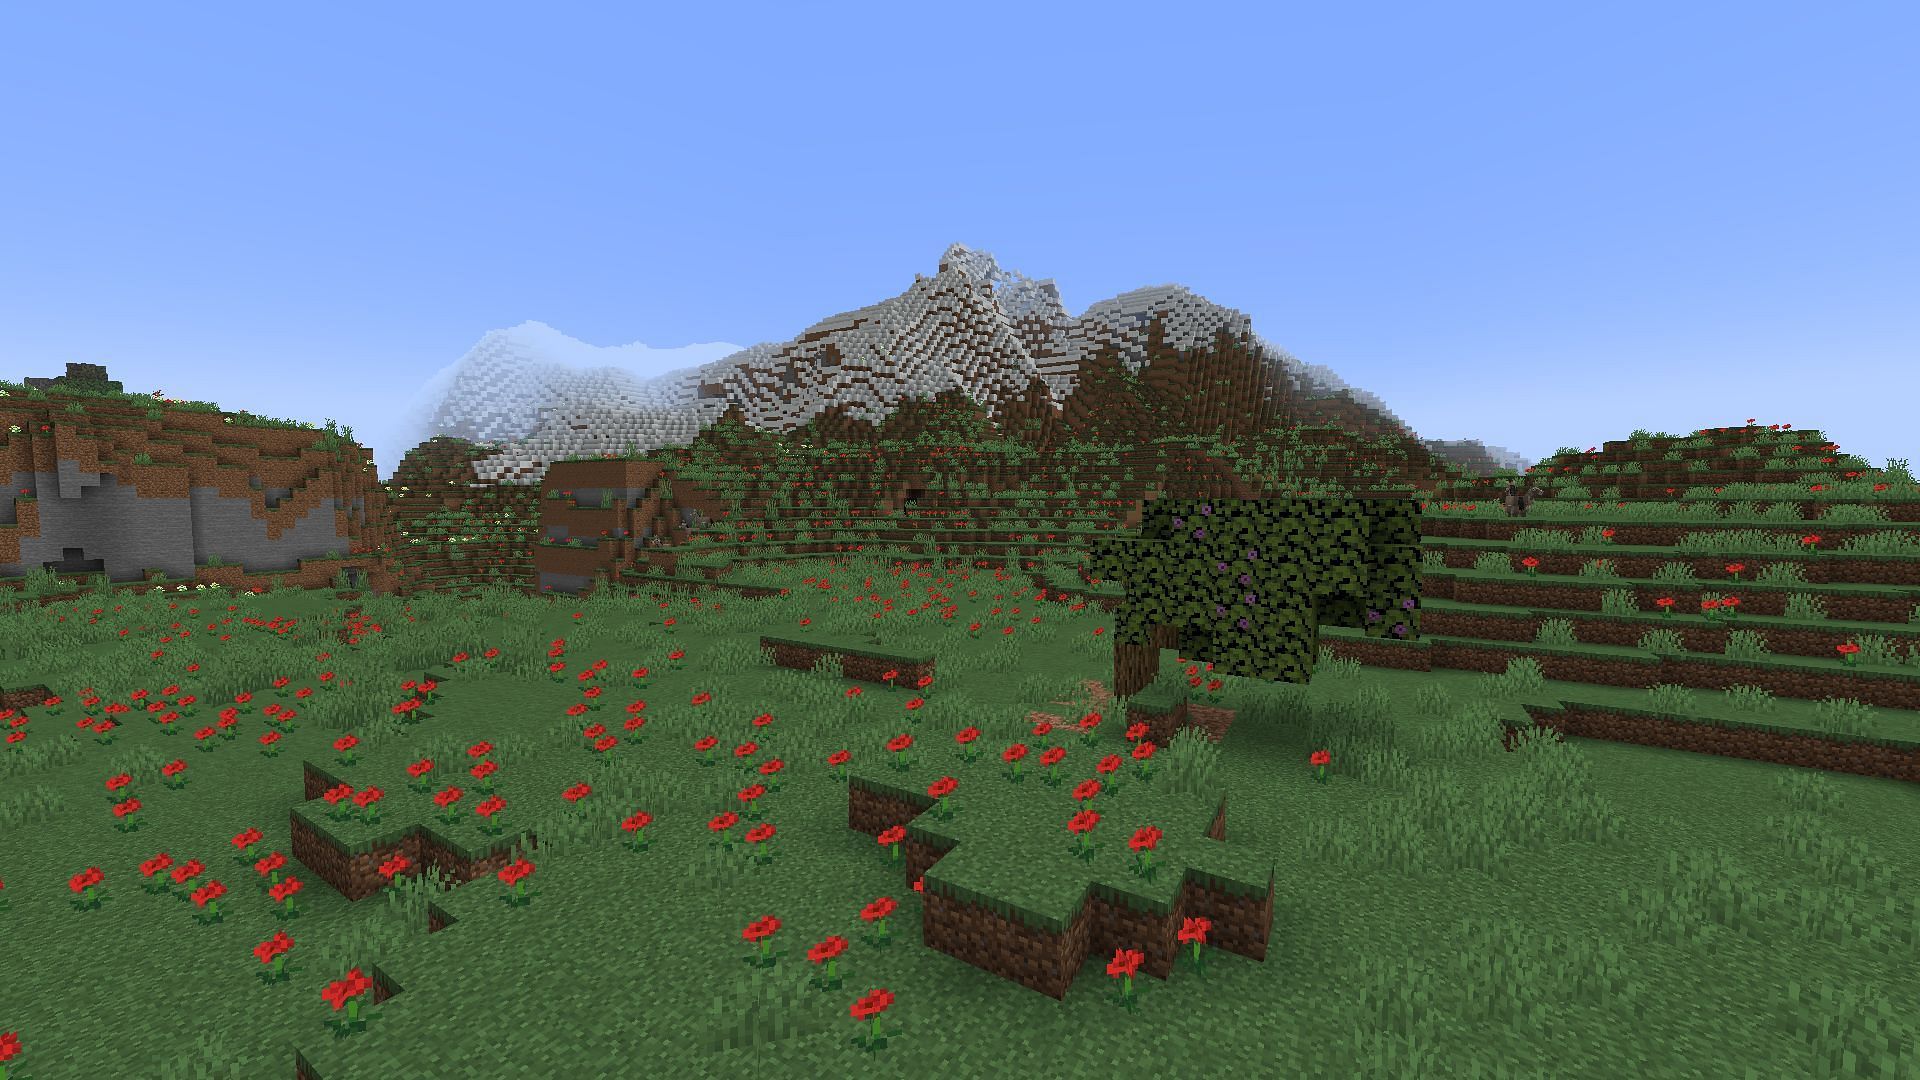 Finding flowers in version 1.18 (Image via Minecraft)